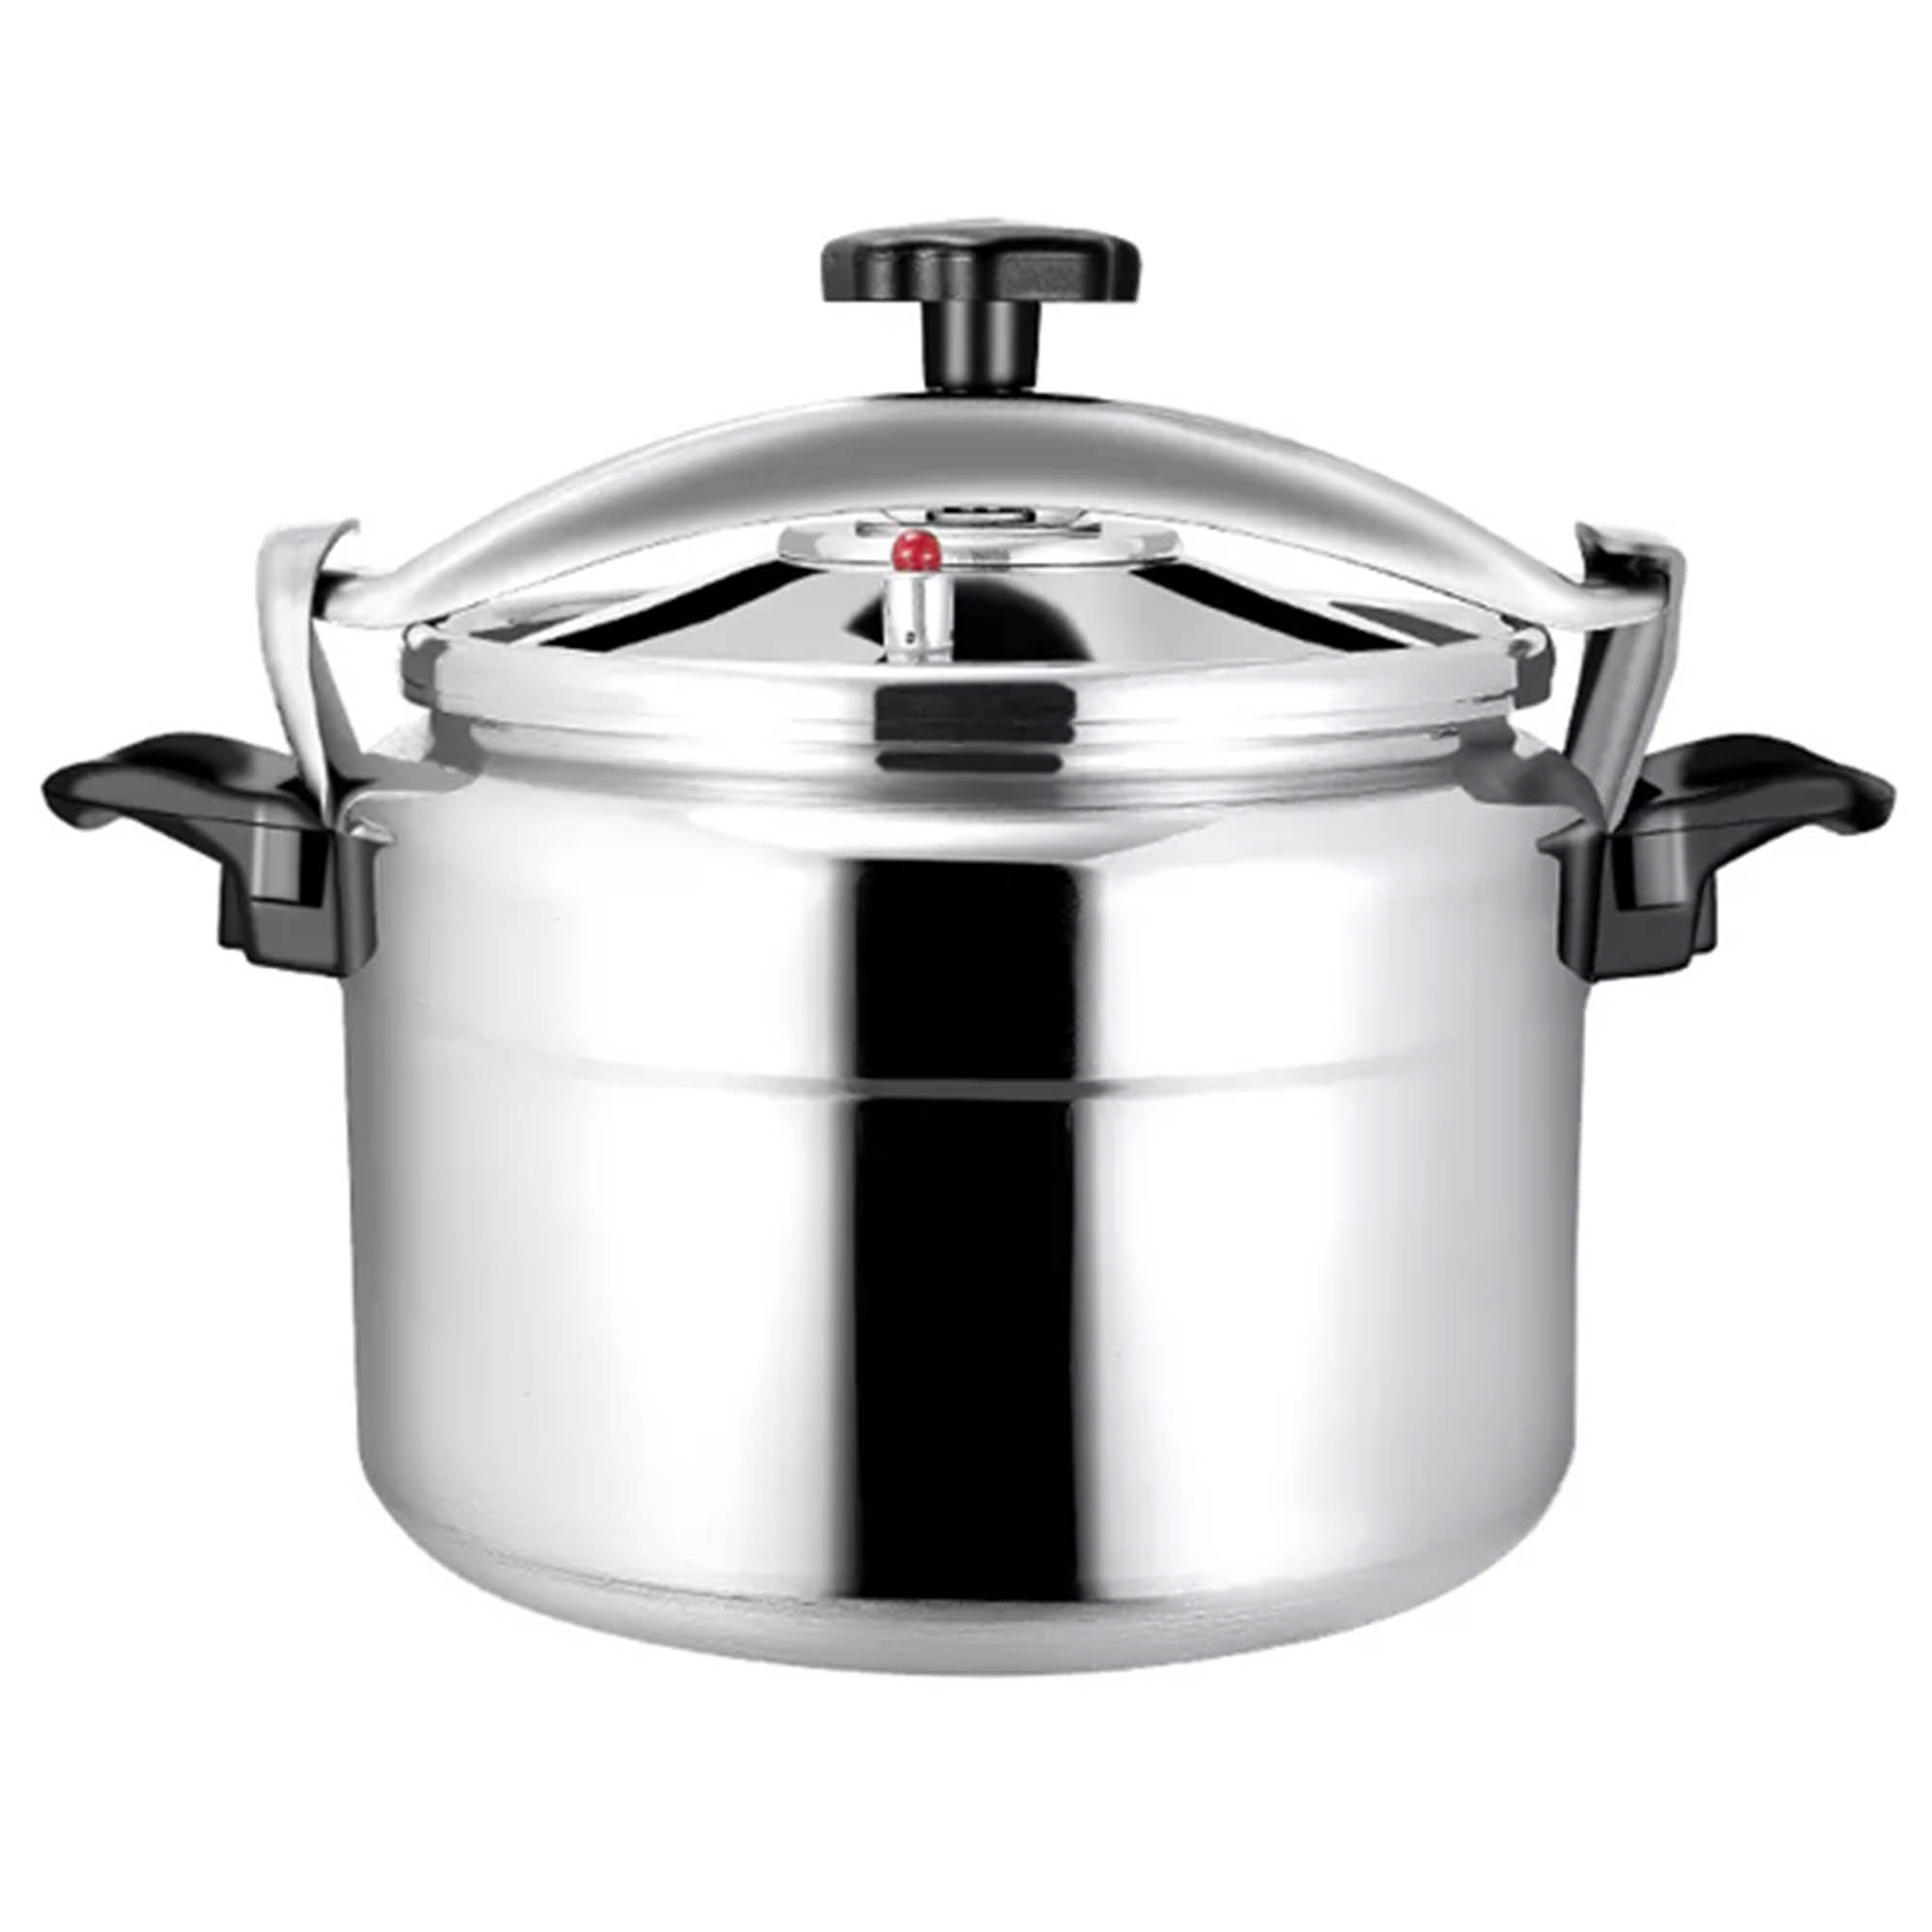 Clipso Stainless Steel Pressure Cooker 8 Quart Induction Cookware